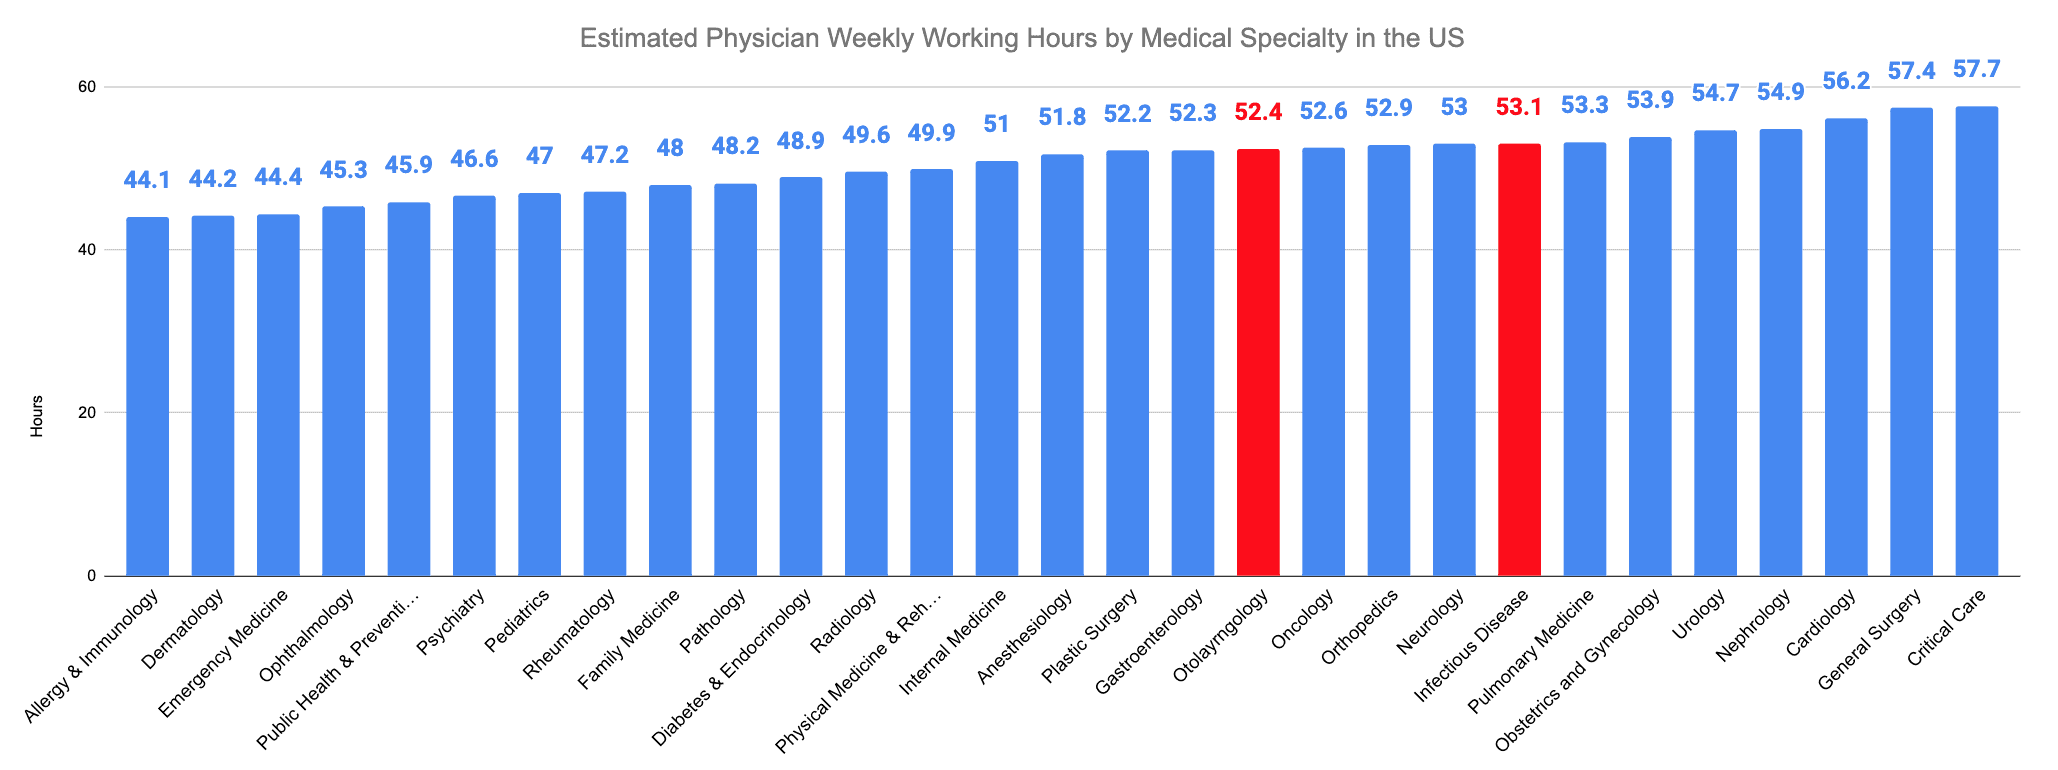 Otolaryngology vs. Infectious Disease Estimated Physician Weekly Working Hours by Medical Specialty in the US